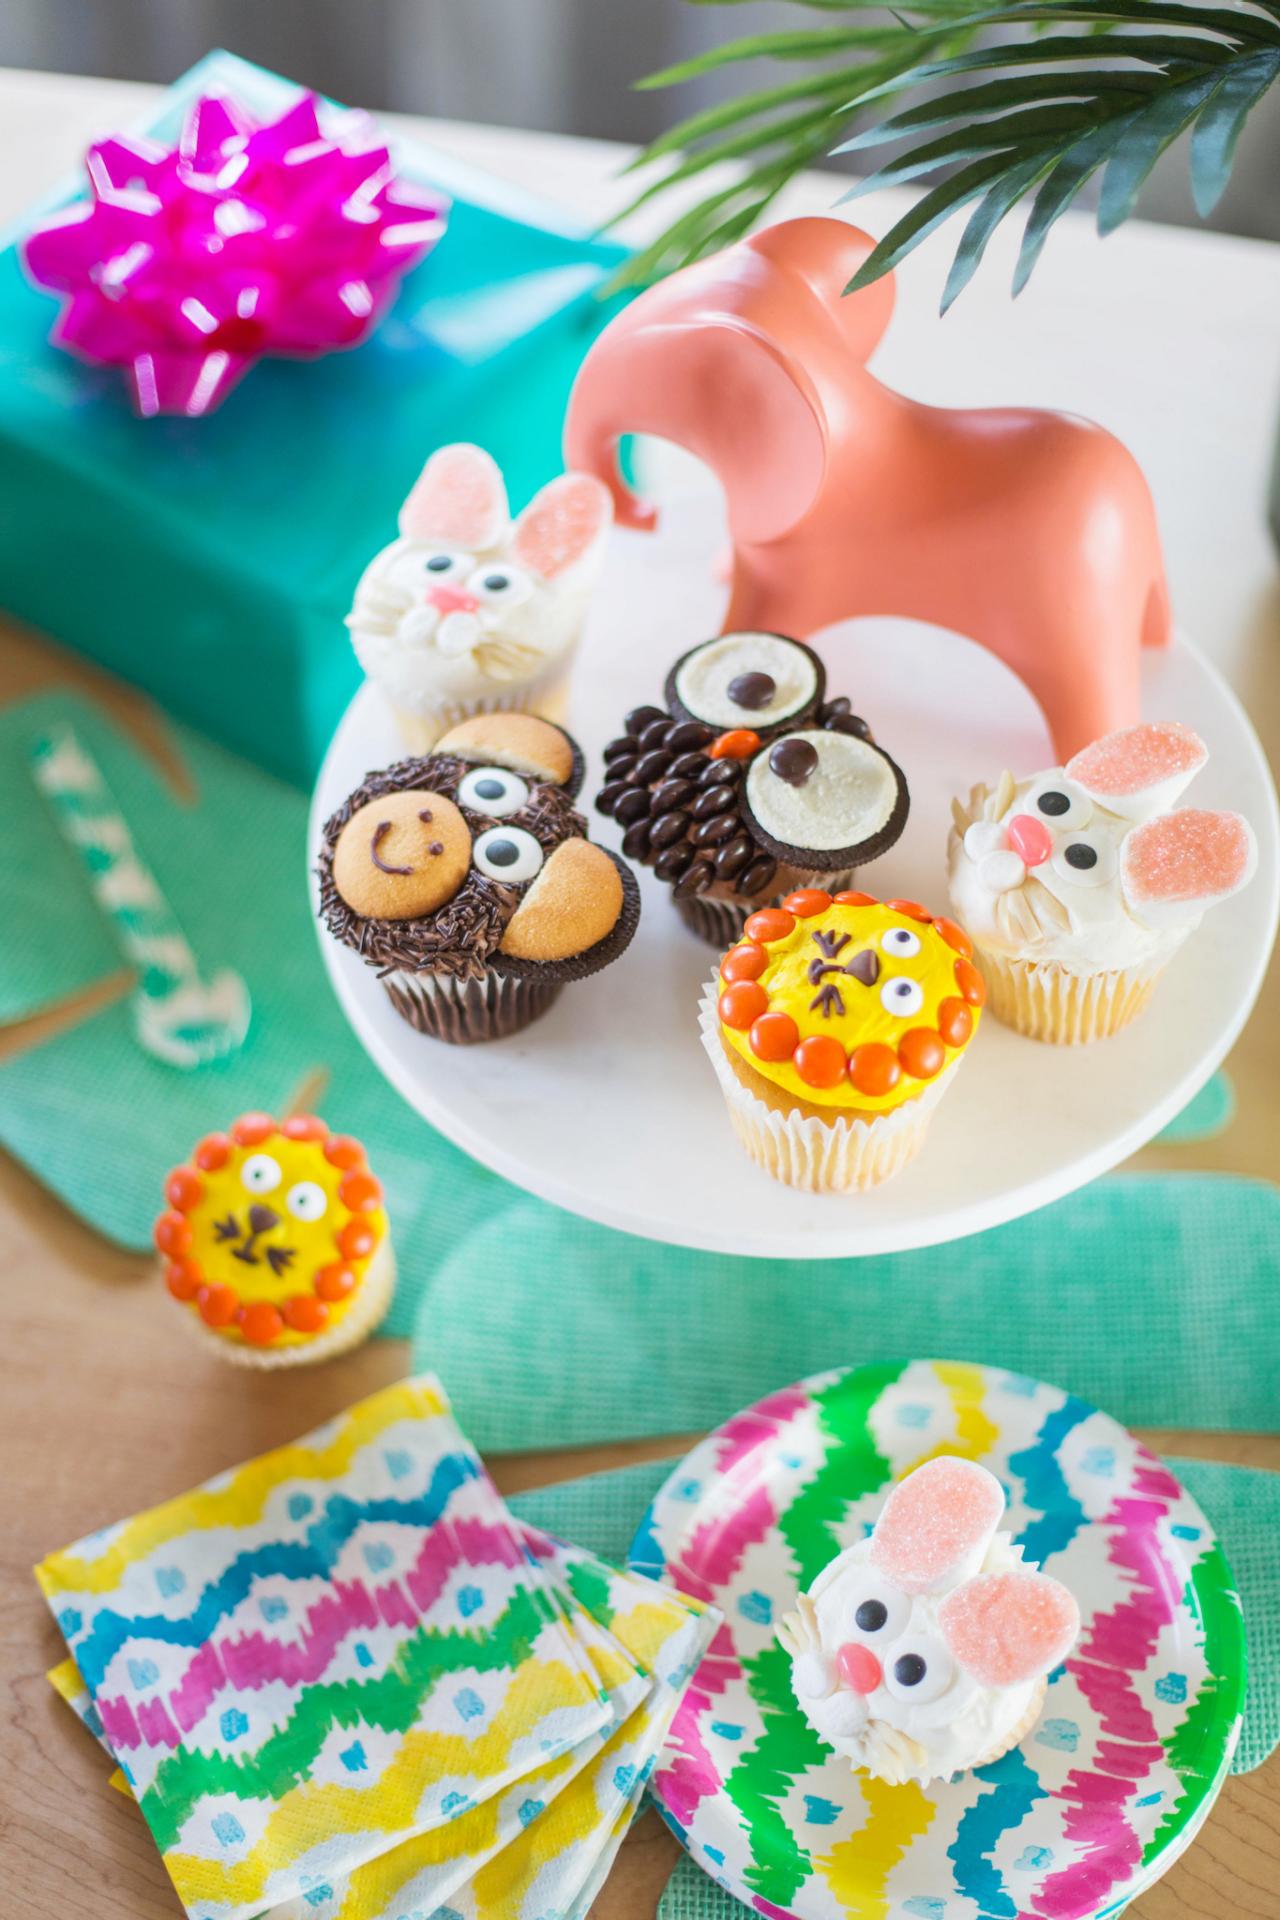 How To Turn Store-Bought Cupcakes Into Cute Emoji Animals | HGTV